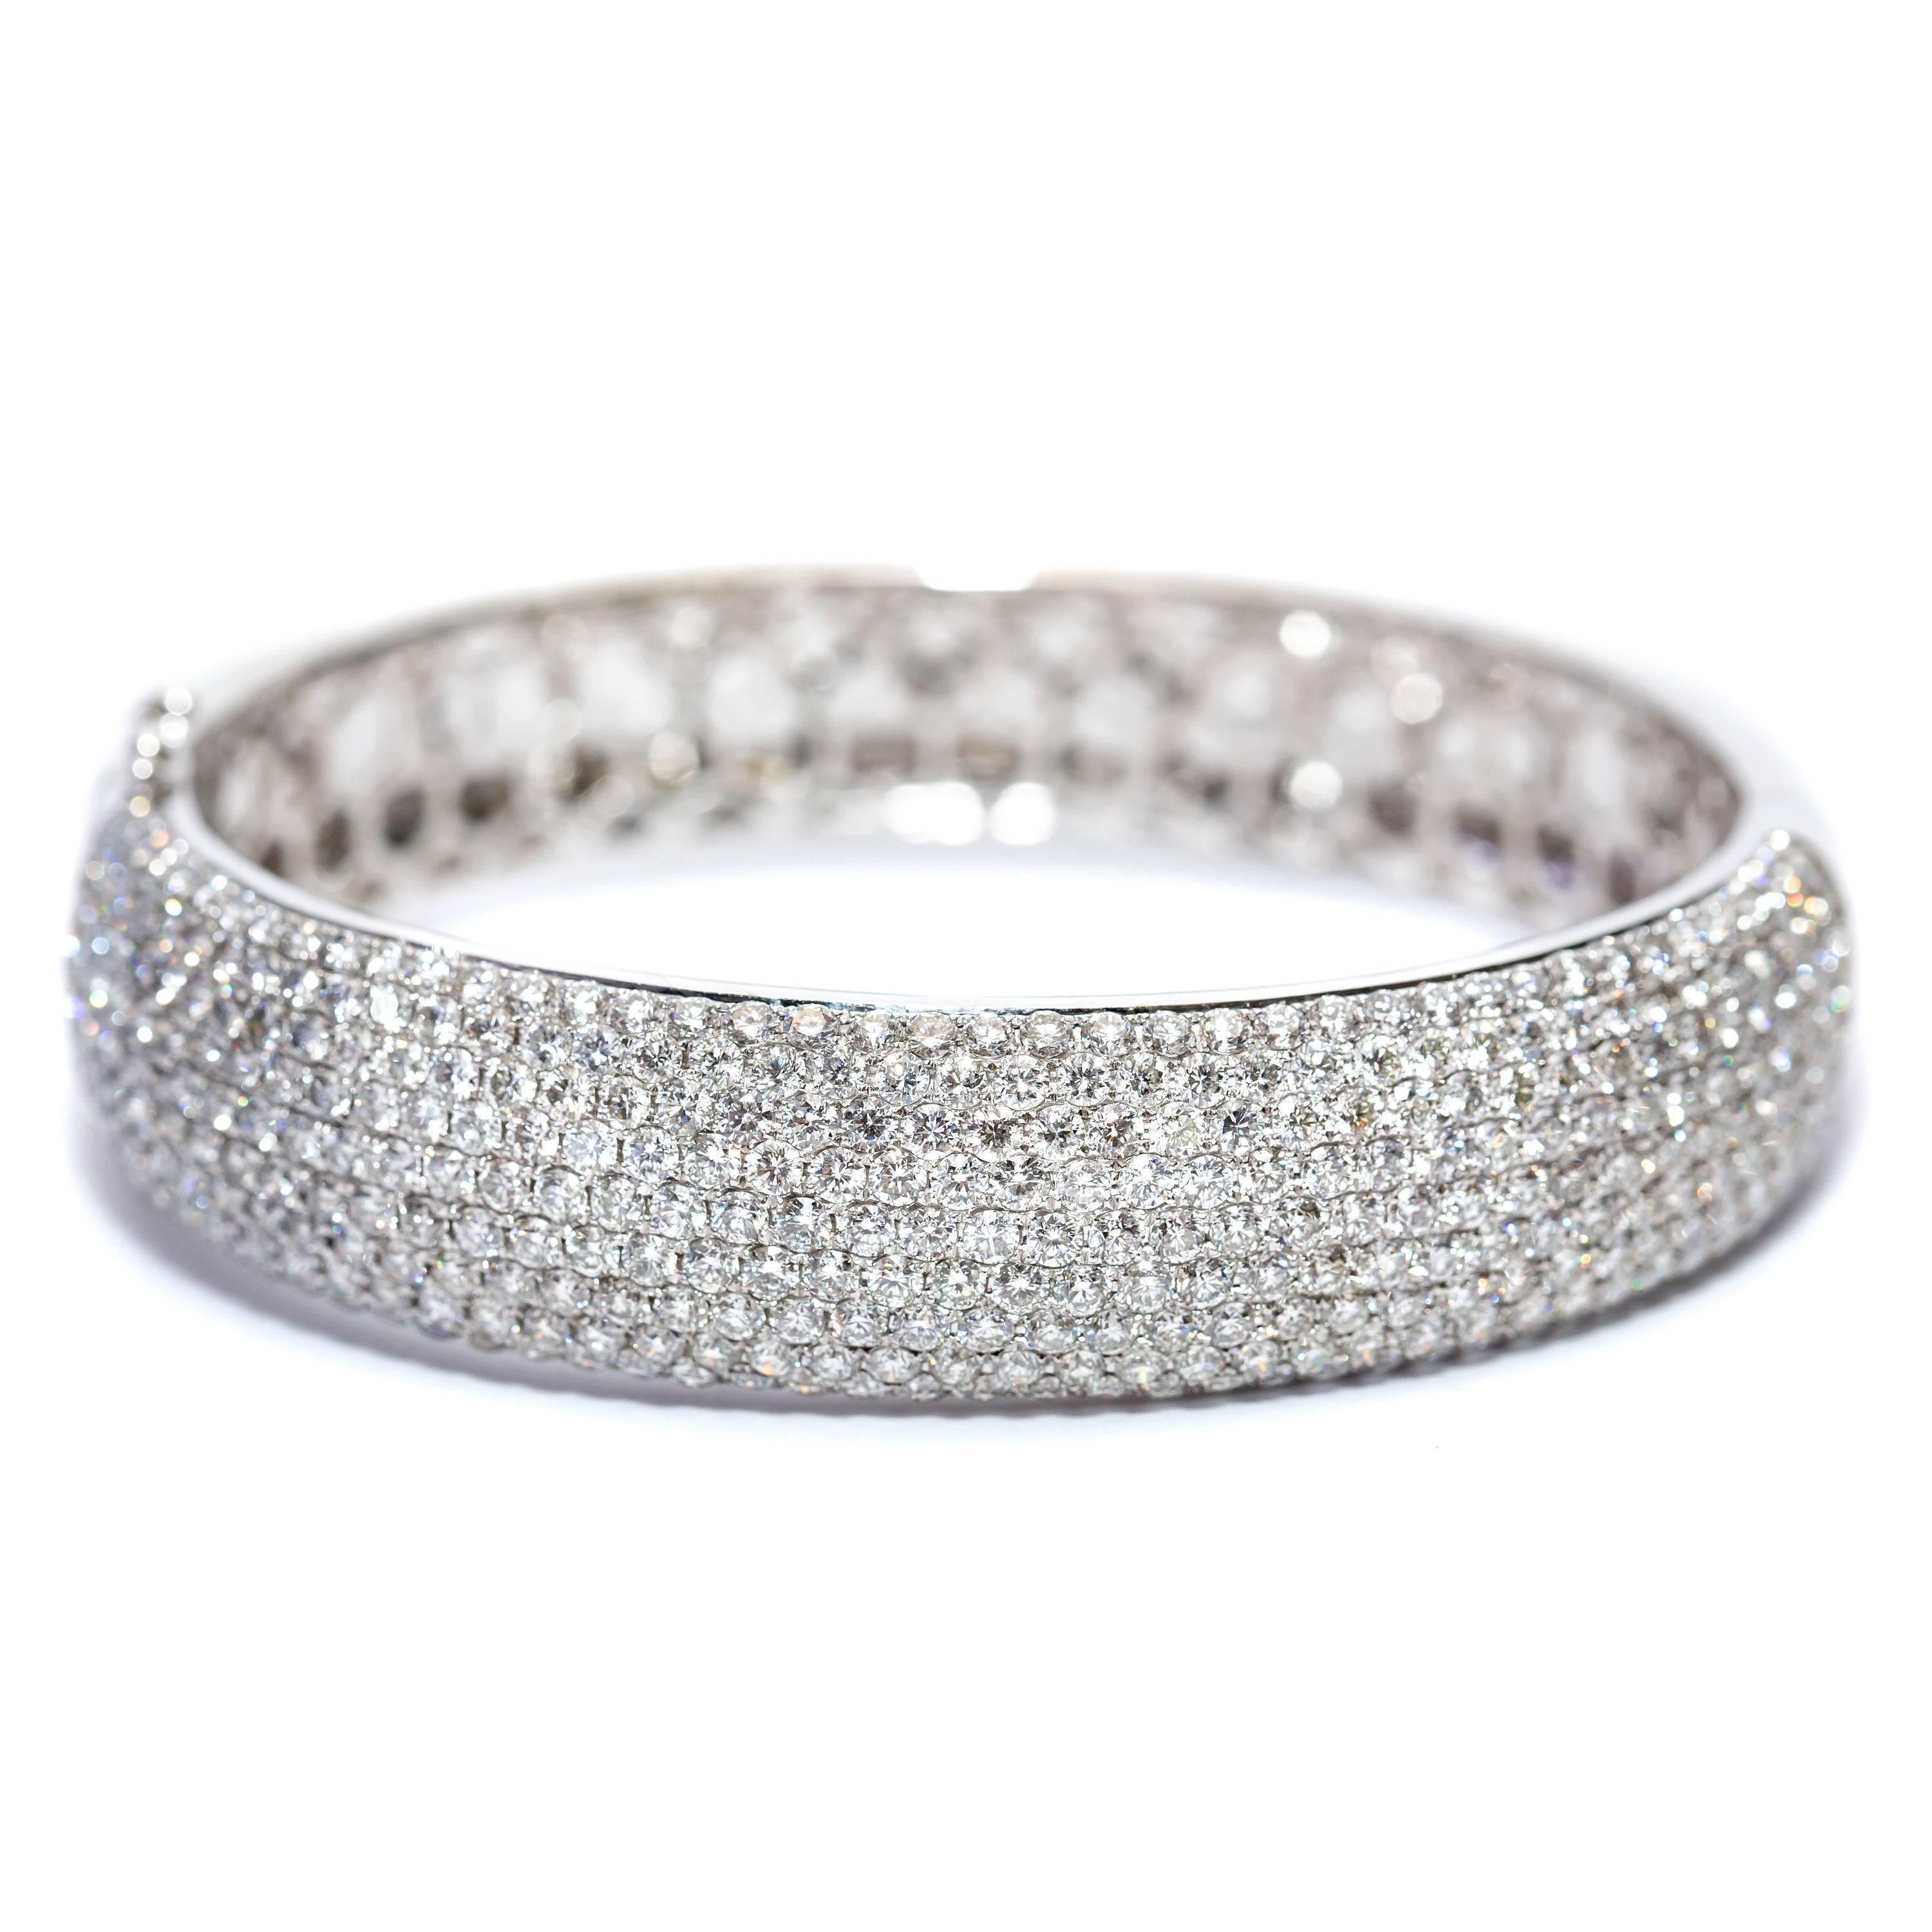 12.00 Carat Round Diamond Pave Set 18 Karat White Gold Bangle Bracelet In New Condition For Sale In London, GB